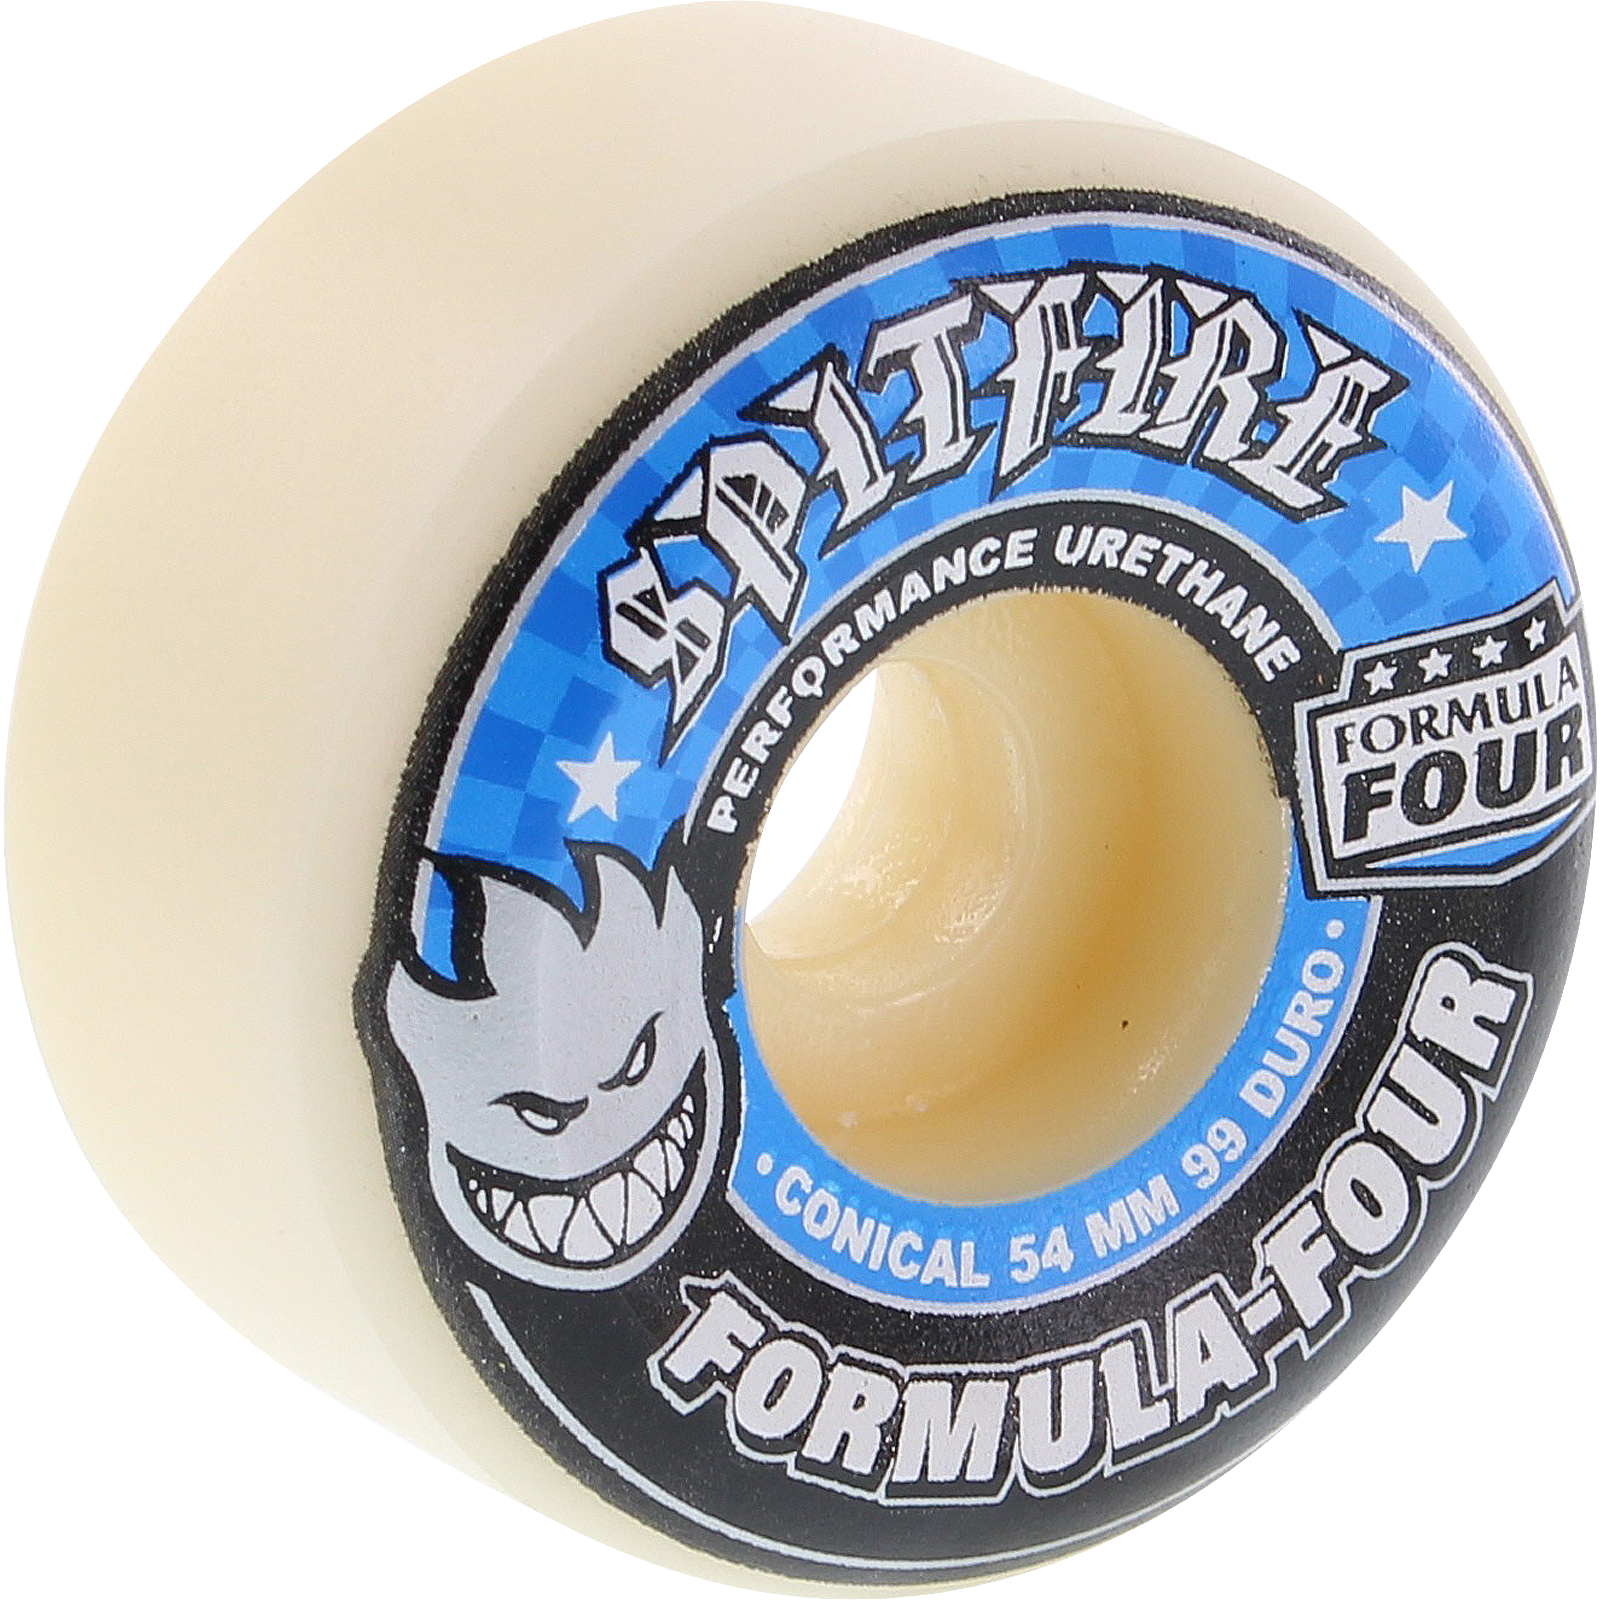 Spitfire F4 99a Conical Full 54mm White W/Blue Skateboard Wheels (Set of 4)